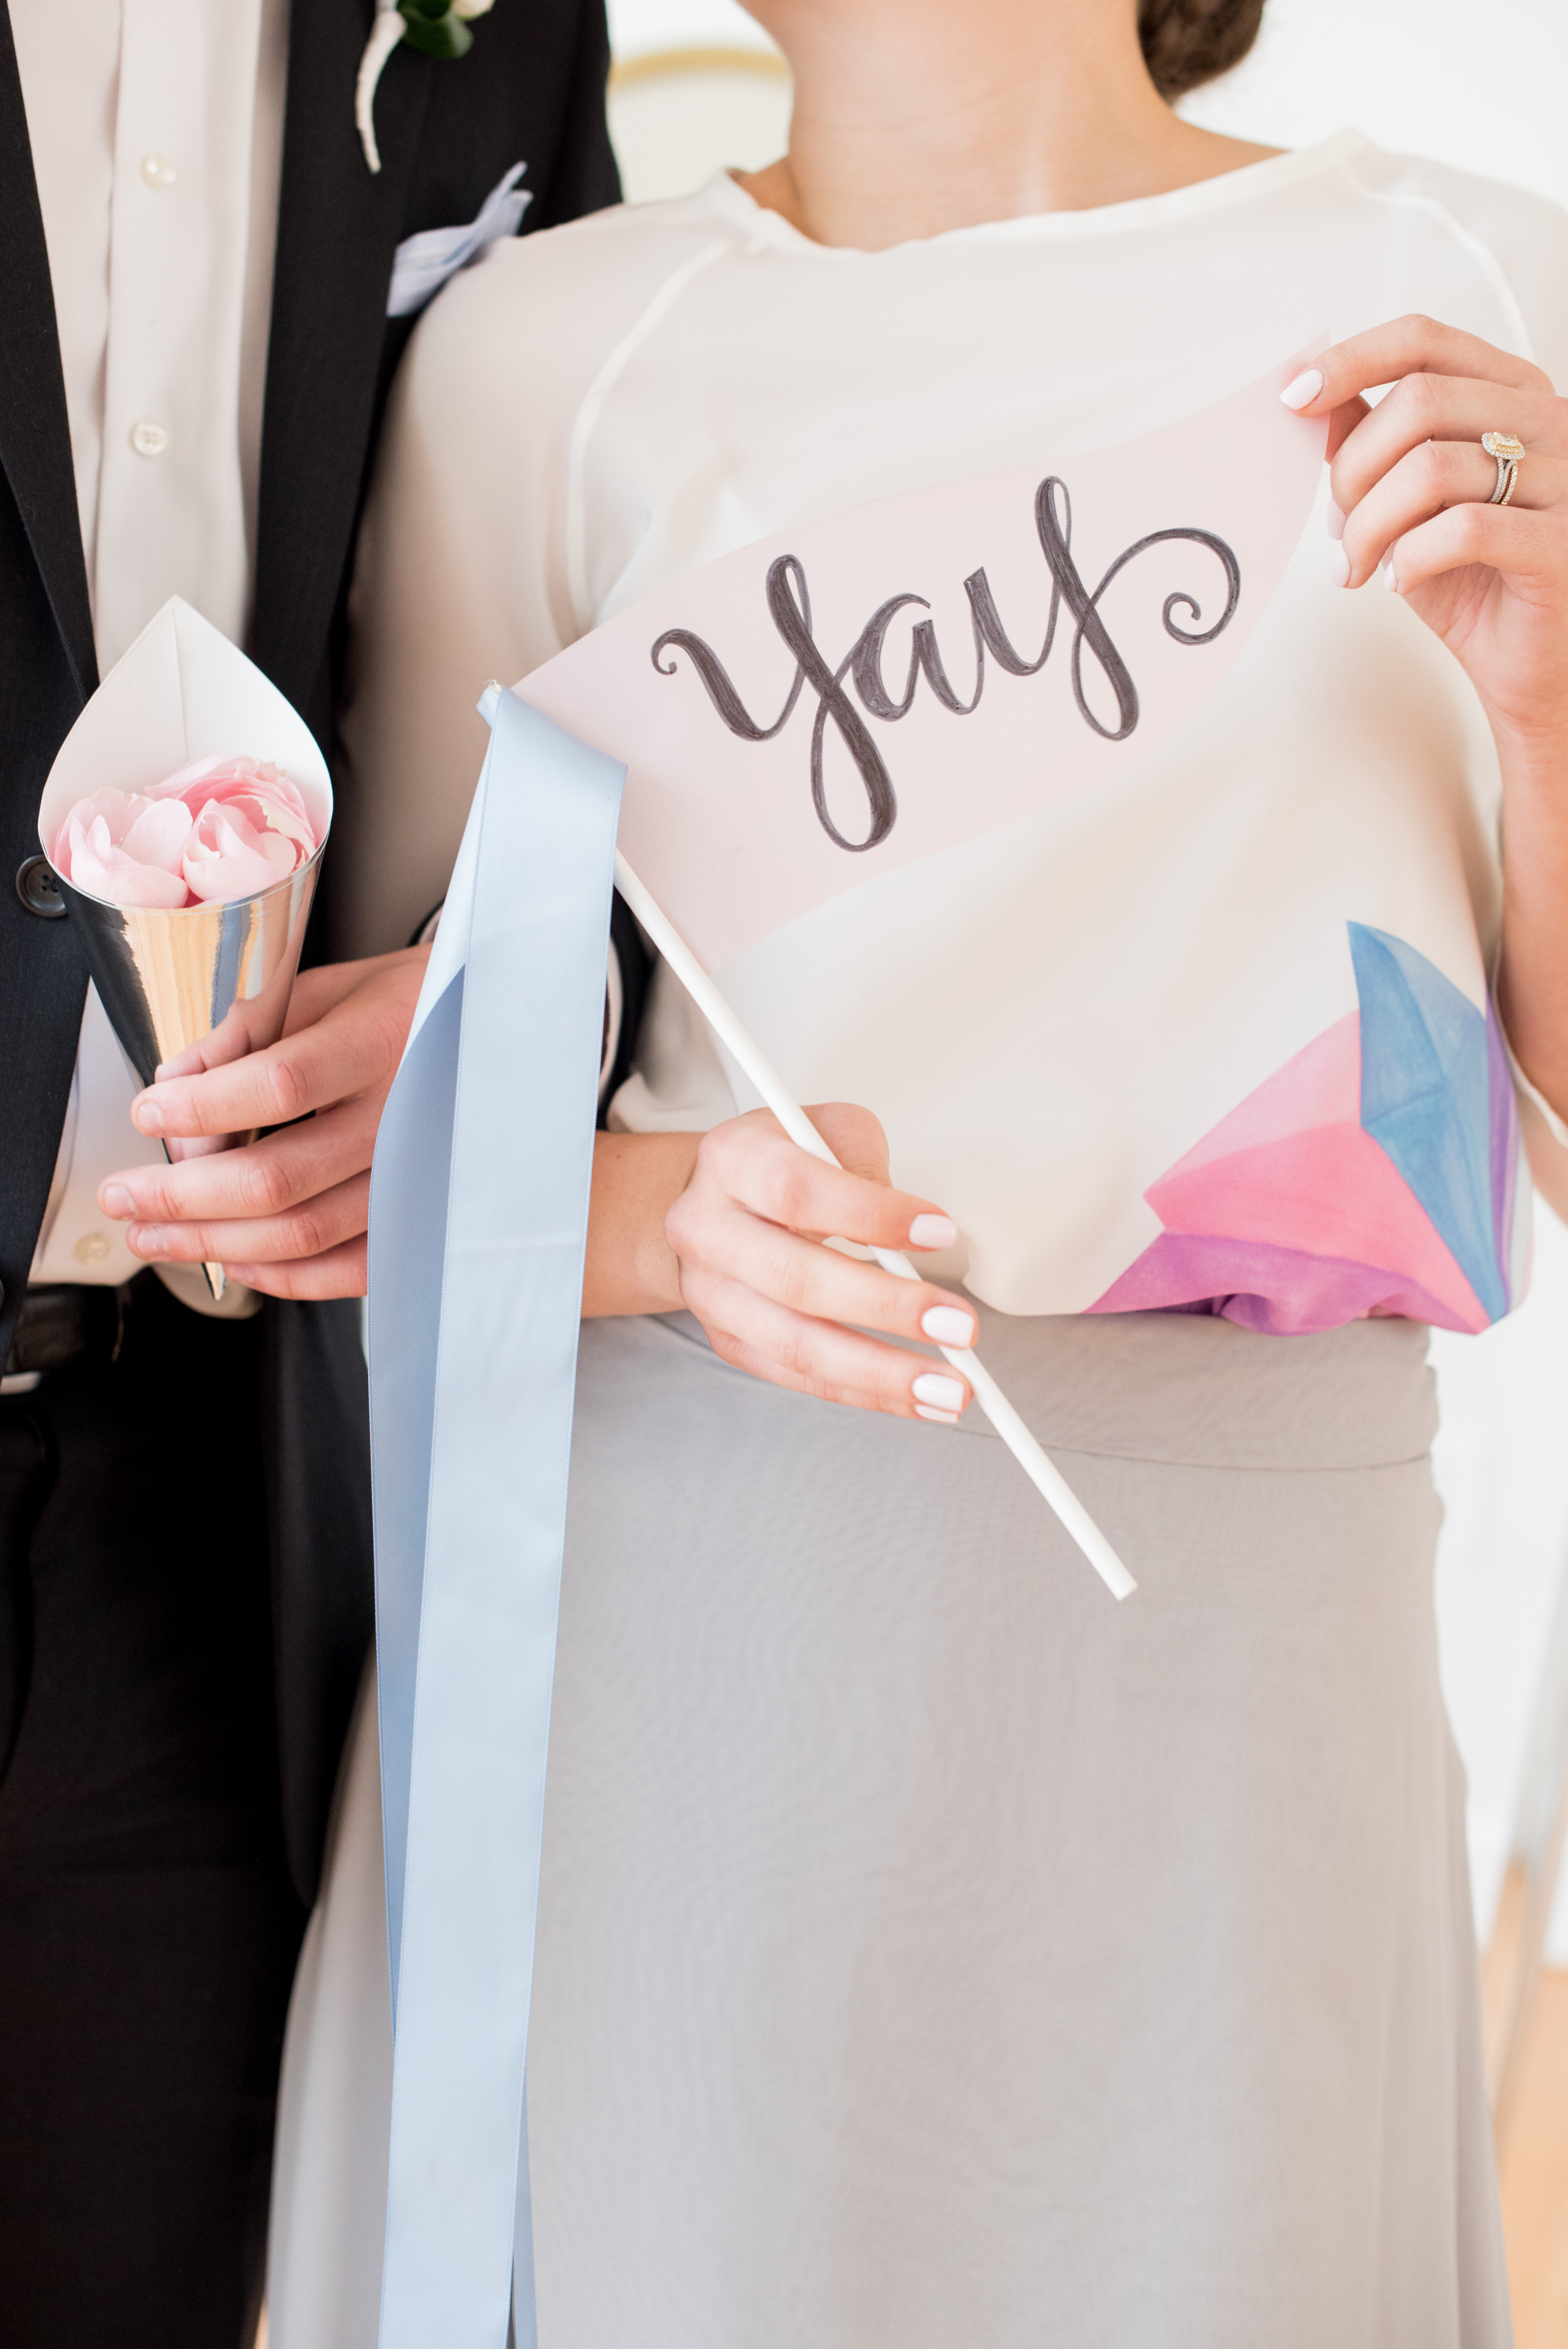 Behind-the-Scenes of a DIY Paper-Crafted Styled Wedding Shoot in The Year's Pantone Colors, Serenity and Rose Quartz, at the Glassbox in Downtown Raleigh North Carolina